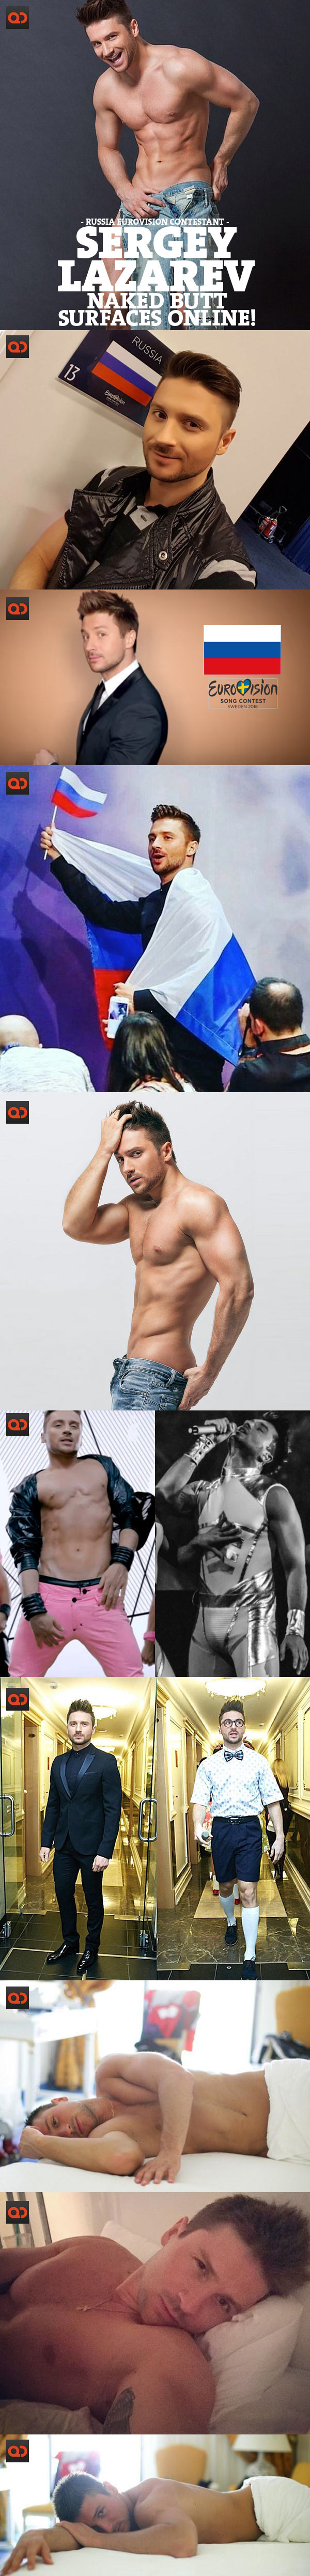 qc-exposed_sergey_lazarev_russia_eurovision_contestant_naked_butt_surfaces_online-collage01